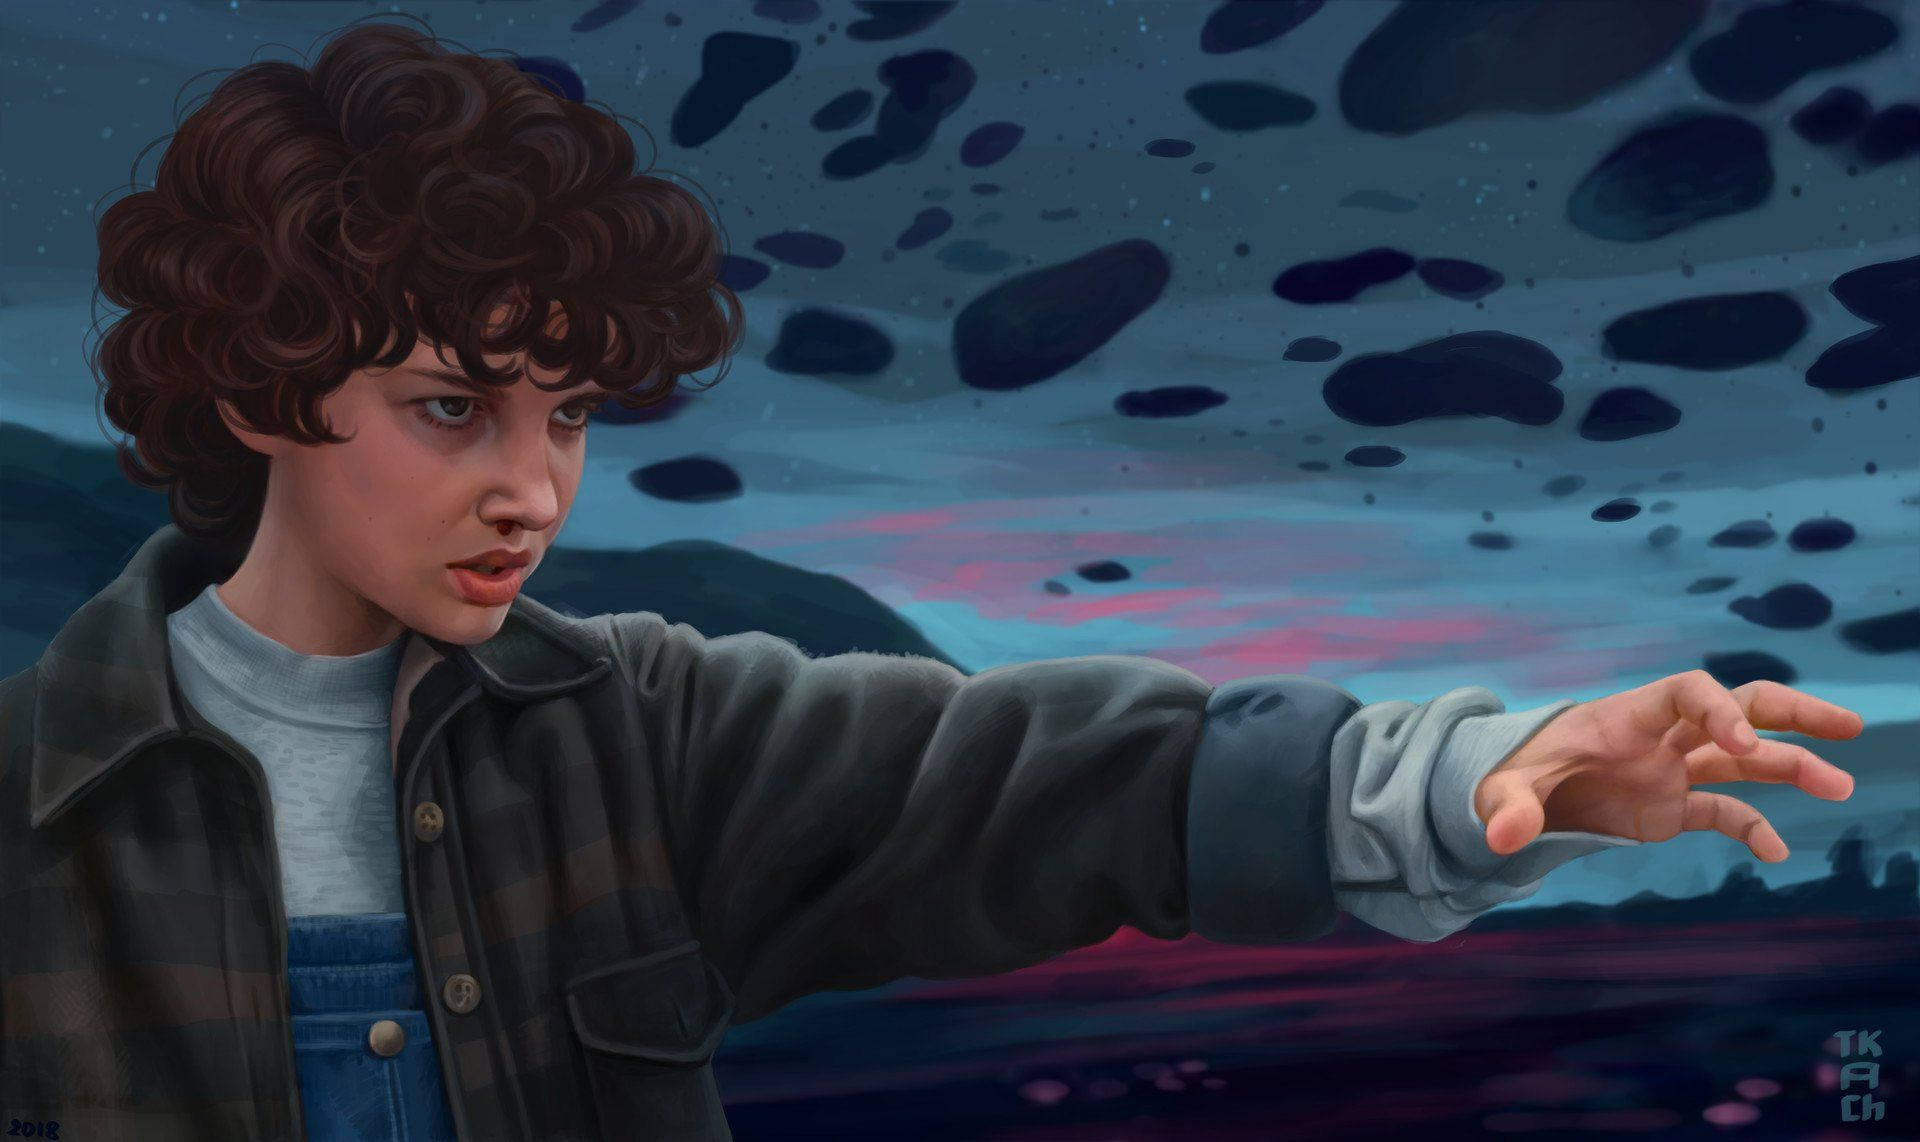 Download Animated Millie Bobby Brown Stranger Things Wallpaper | Wallpapers .com